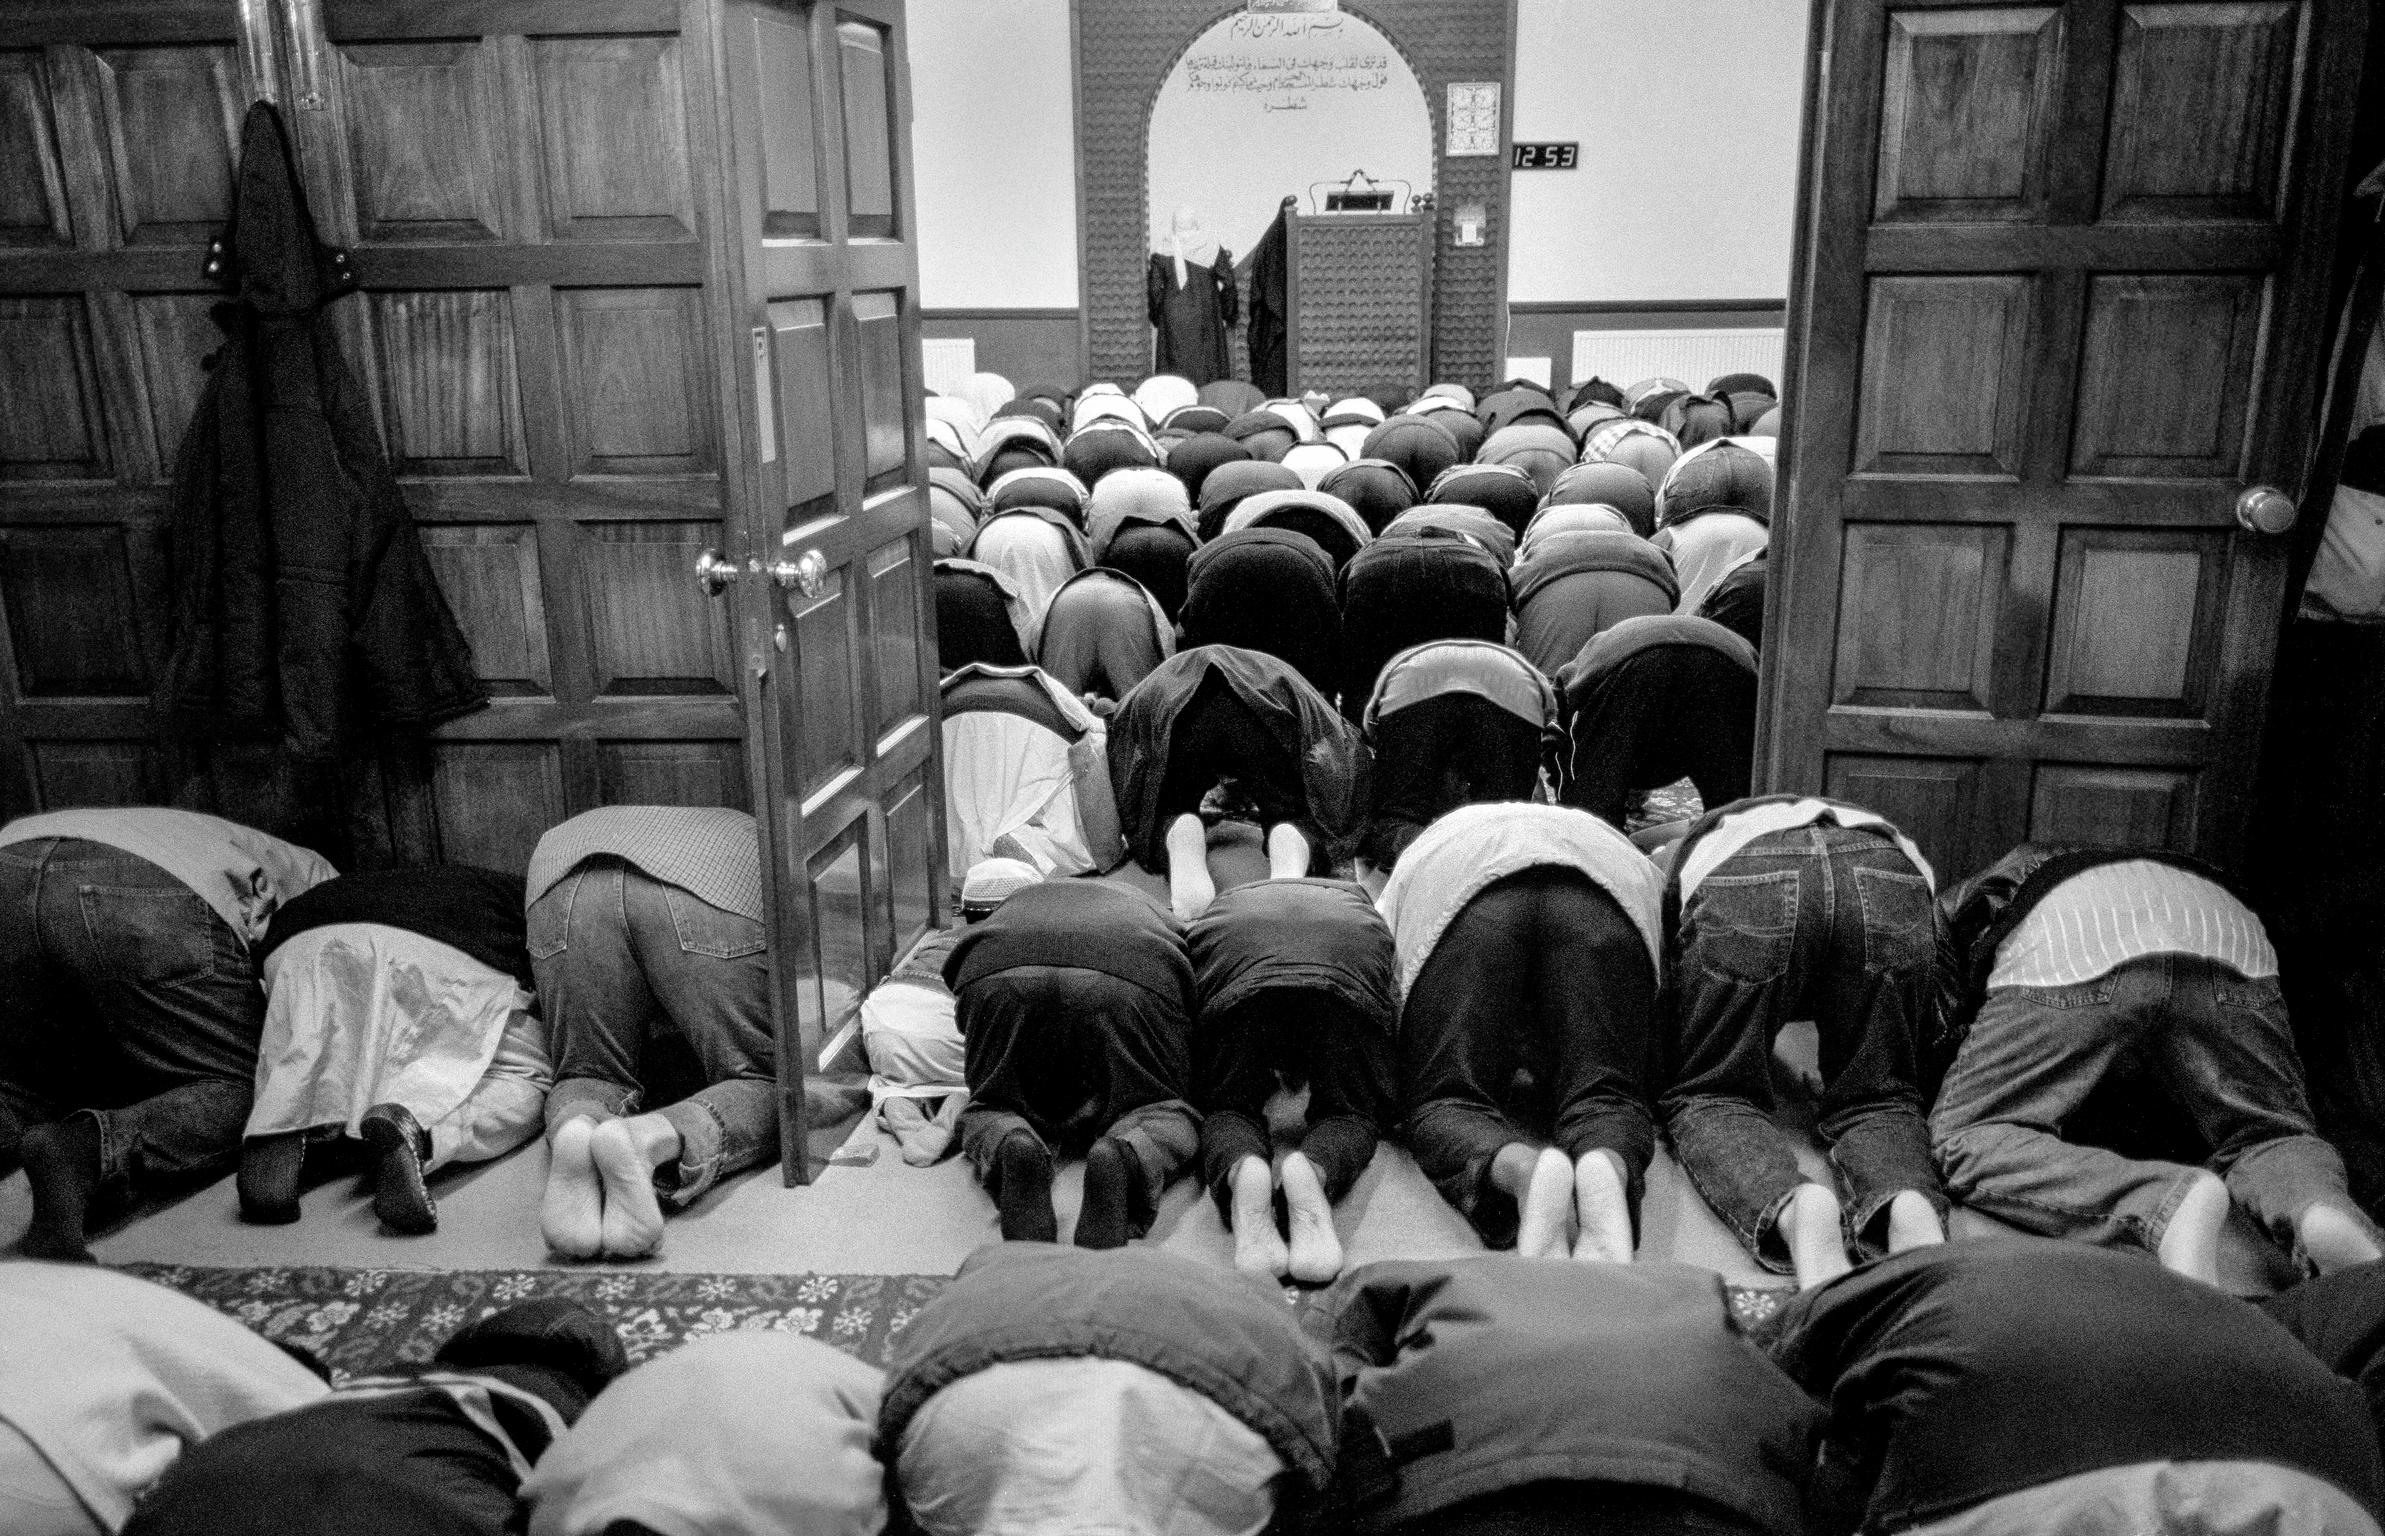 Prayer time inside the Alice Street Mosque in Butetown. Cardiff, Wales